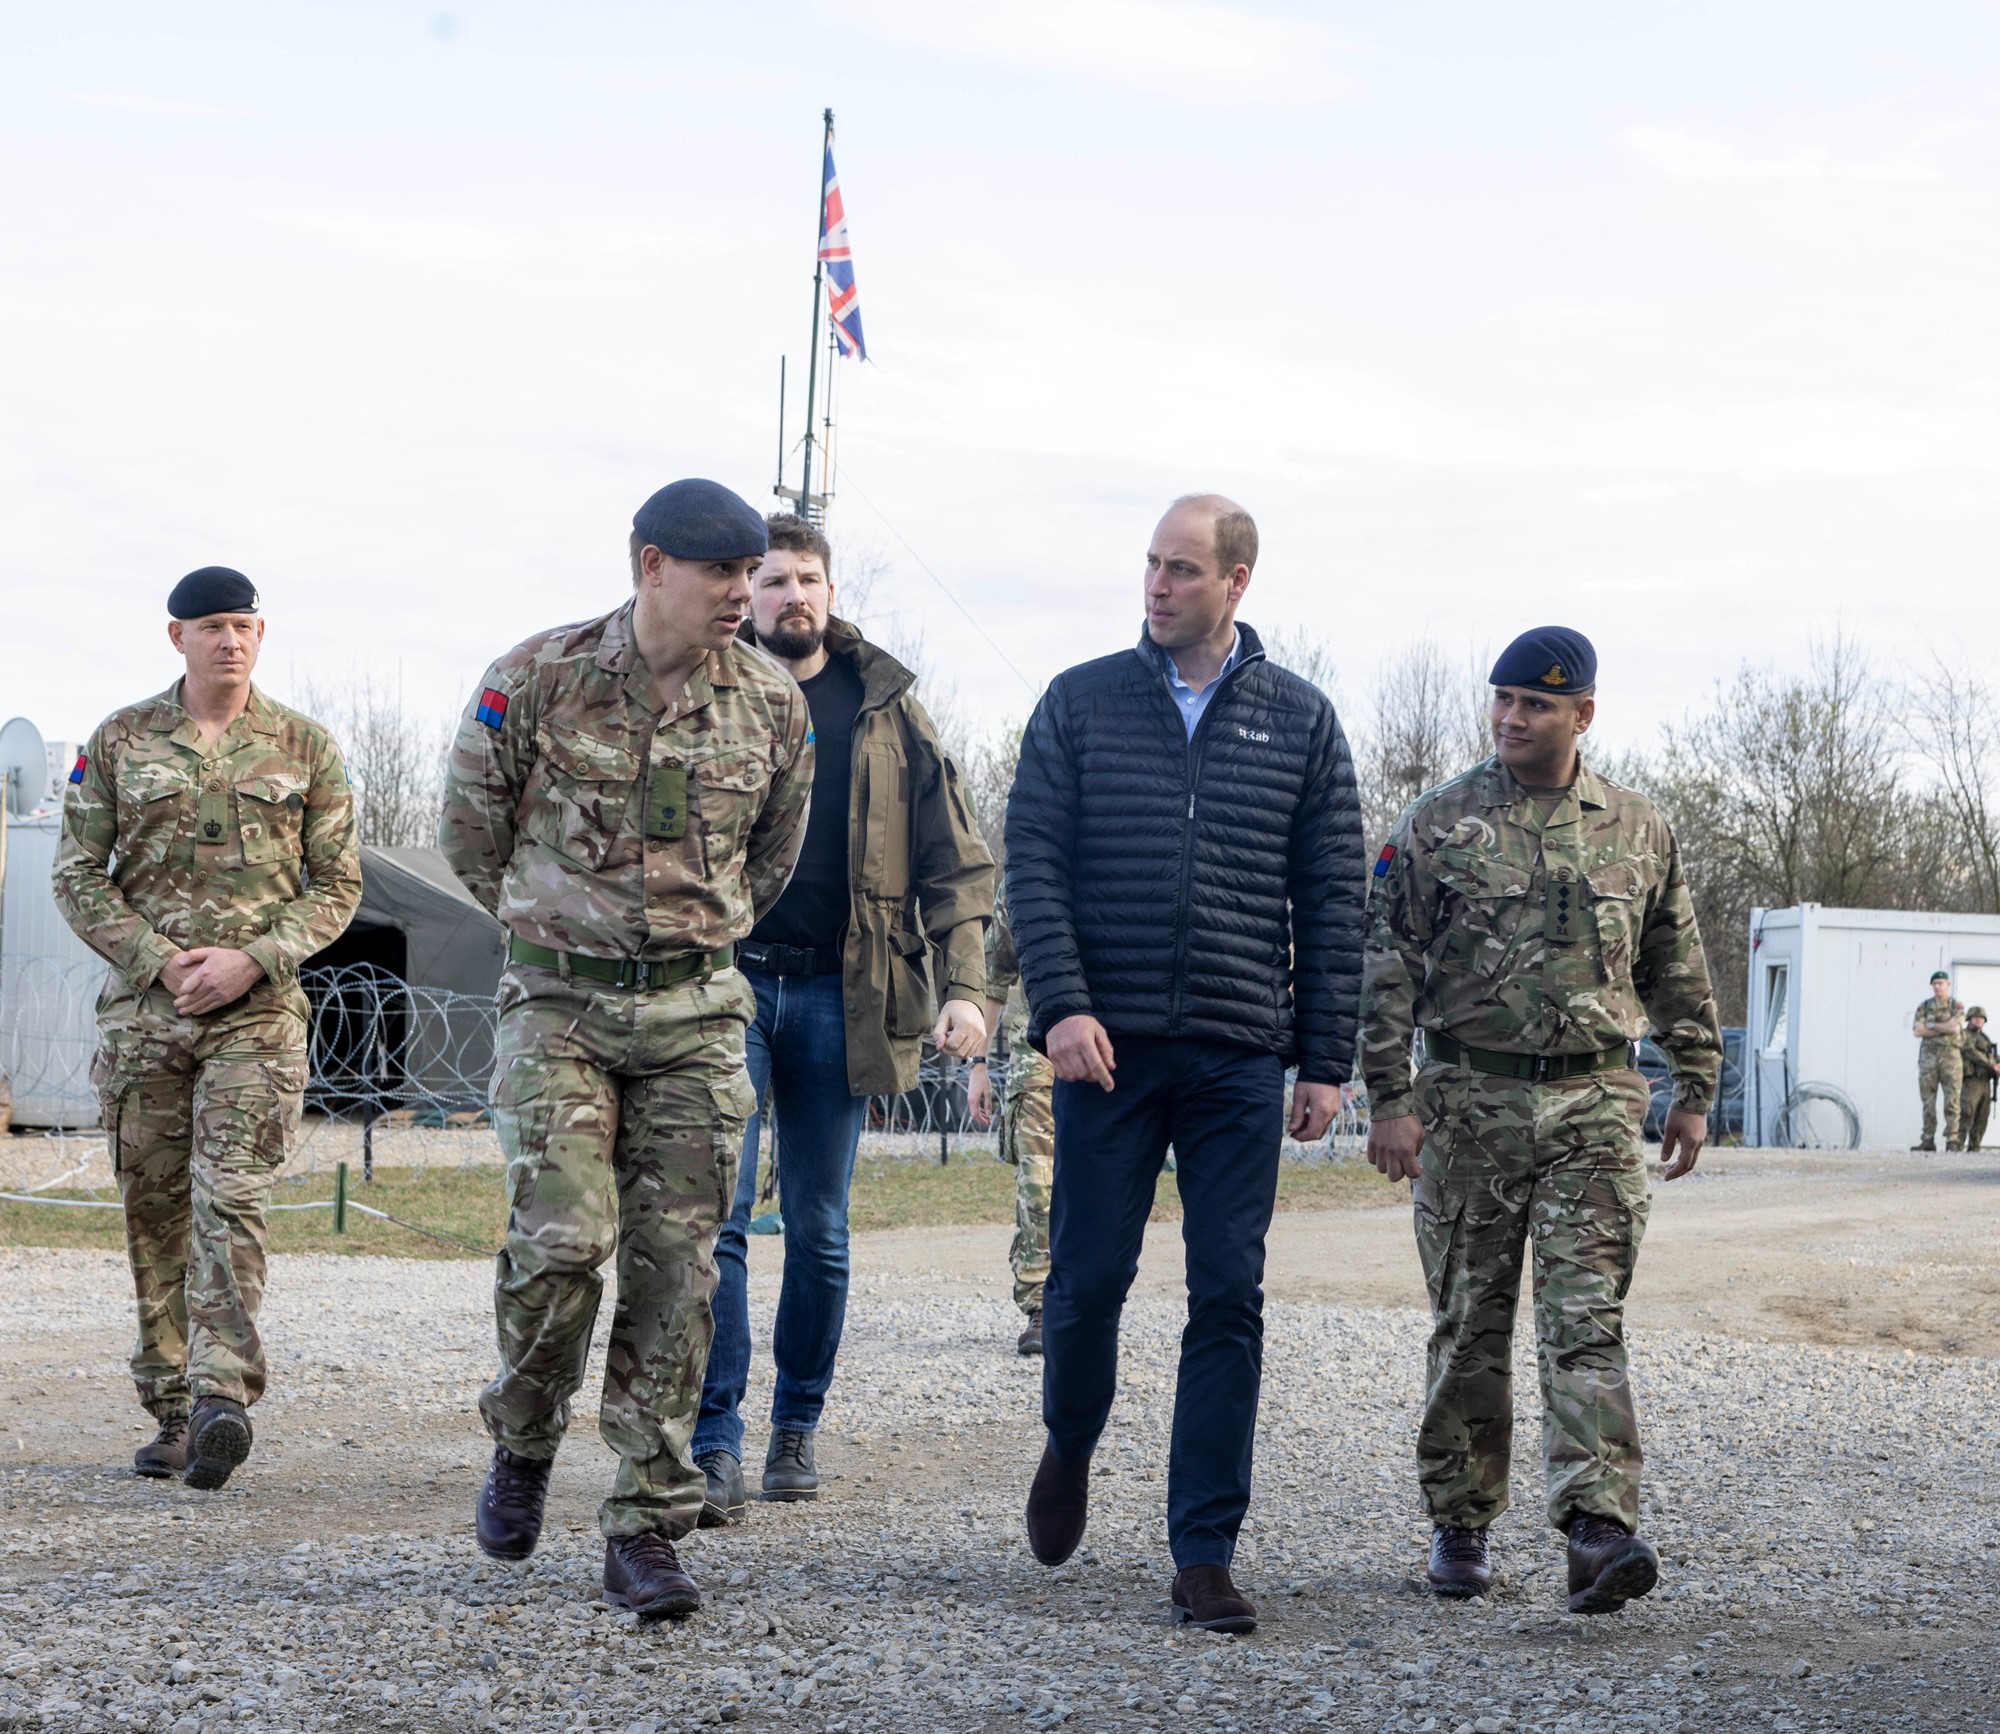 Prince William walks with men in military uniform. 